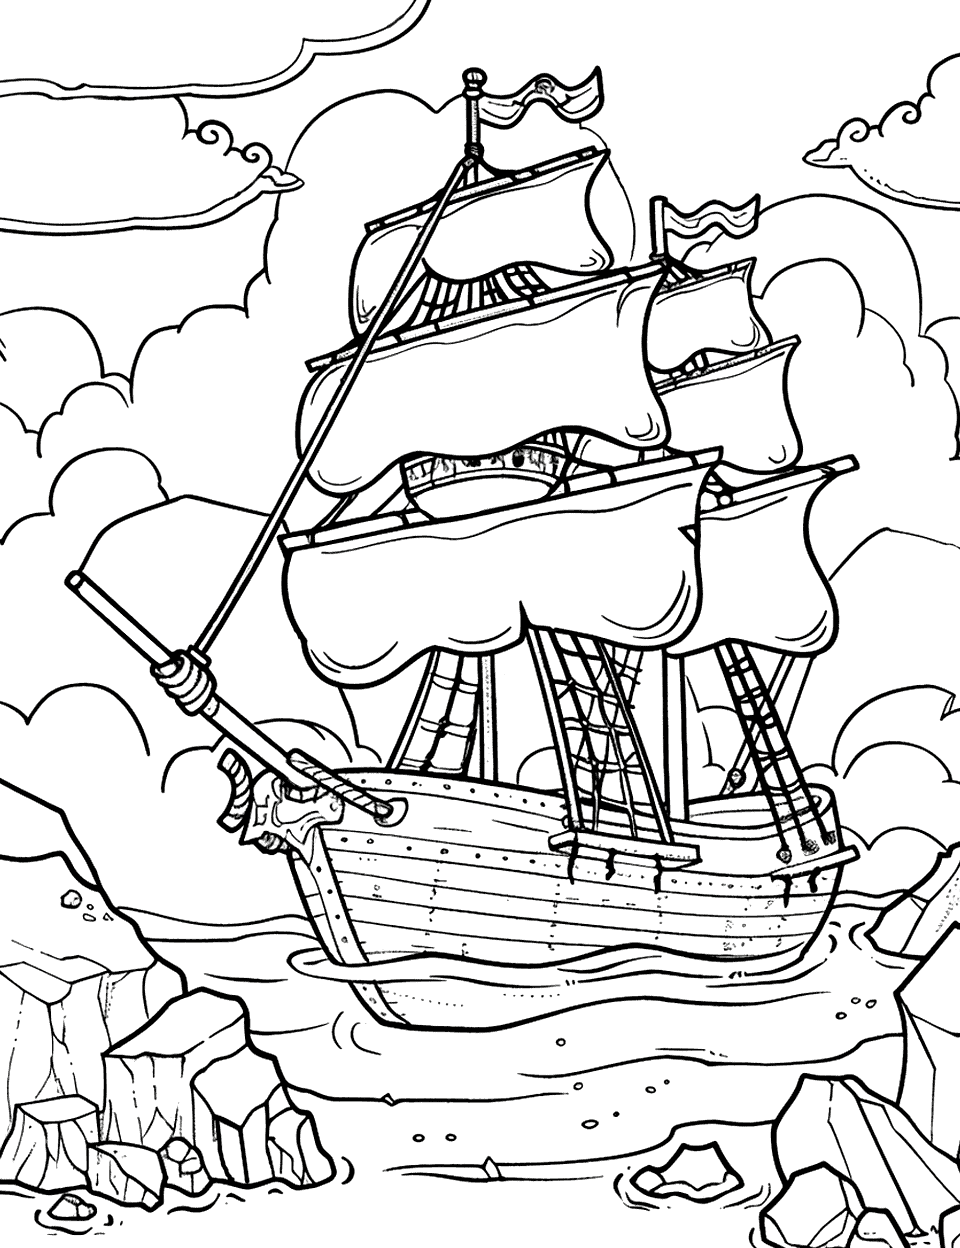 Sea Escape Pirate Coloring Page - A pirate ship skillfully navigating through rocks.